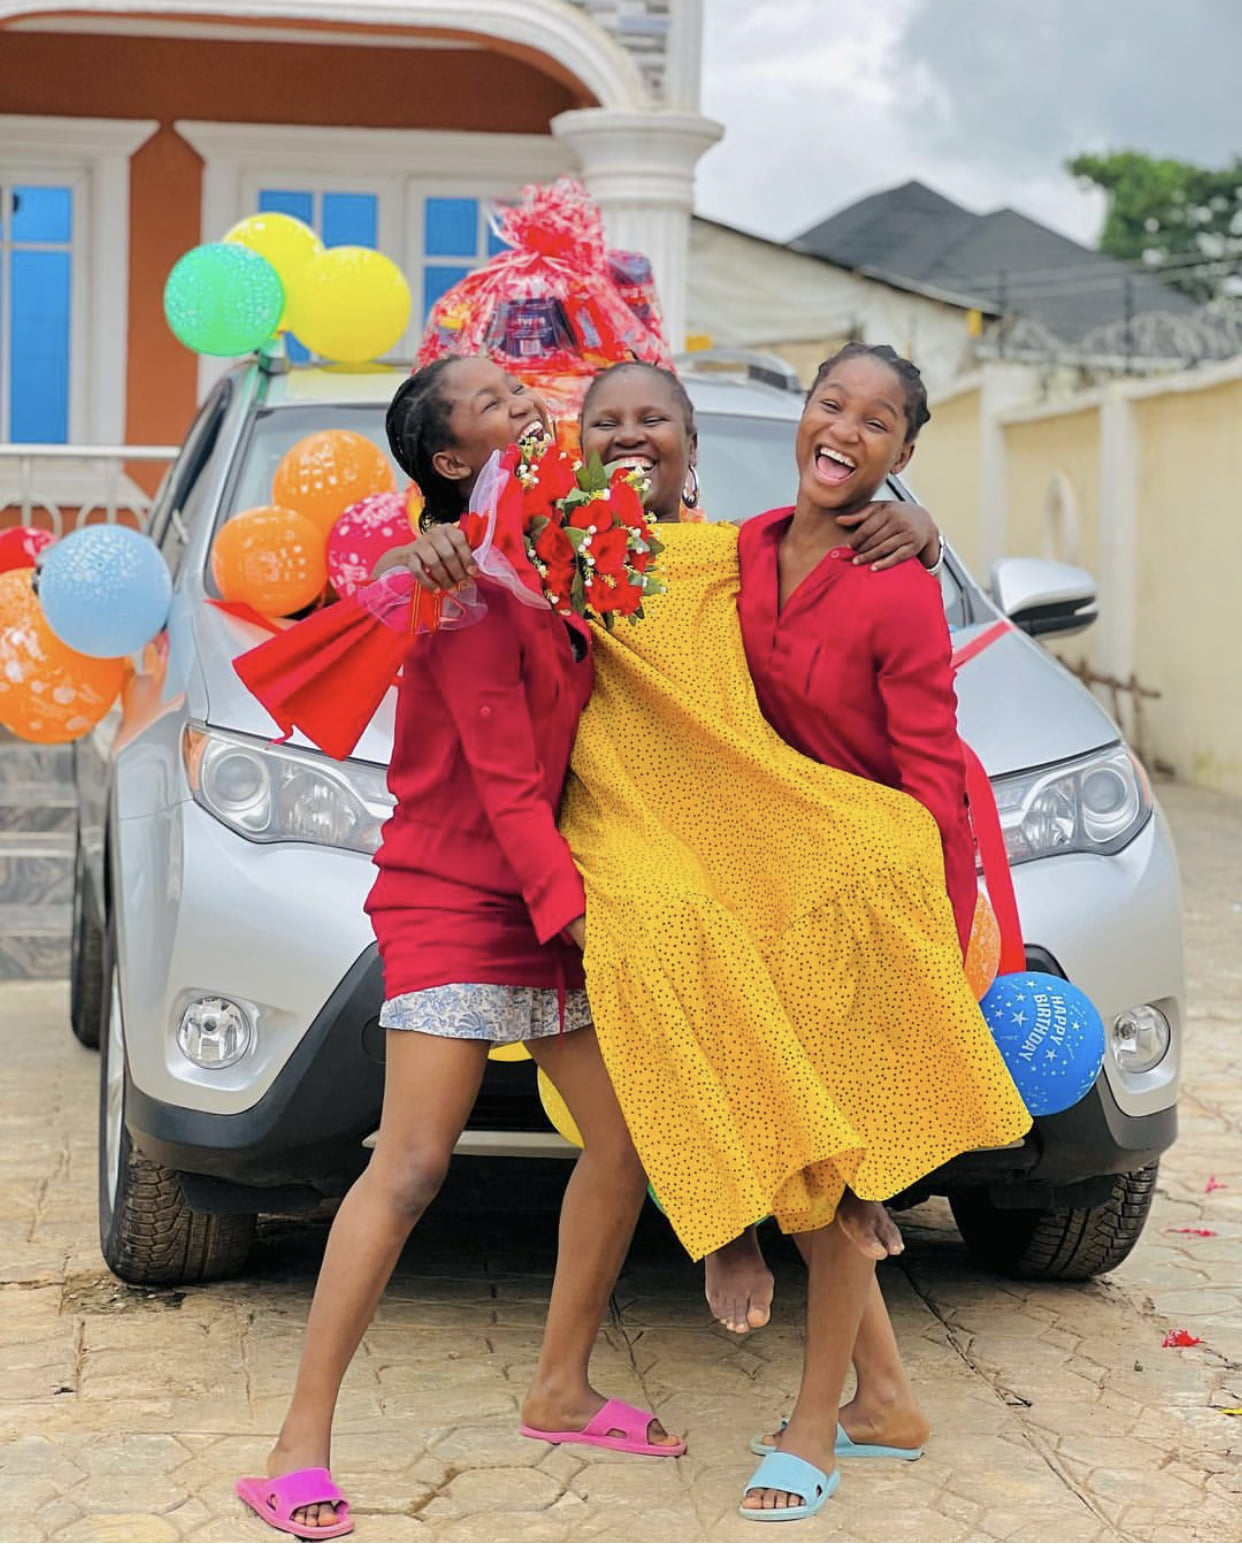 Skit Makers Twinz Love Surprise mom with new car [video]